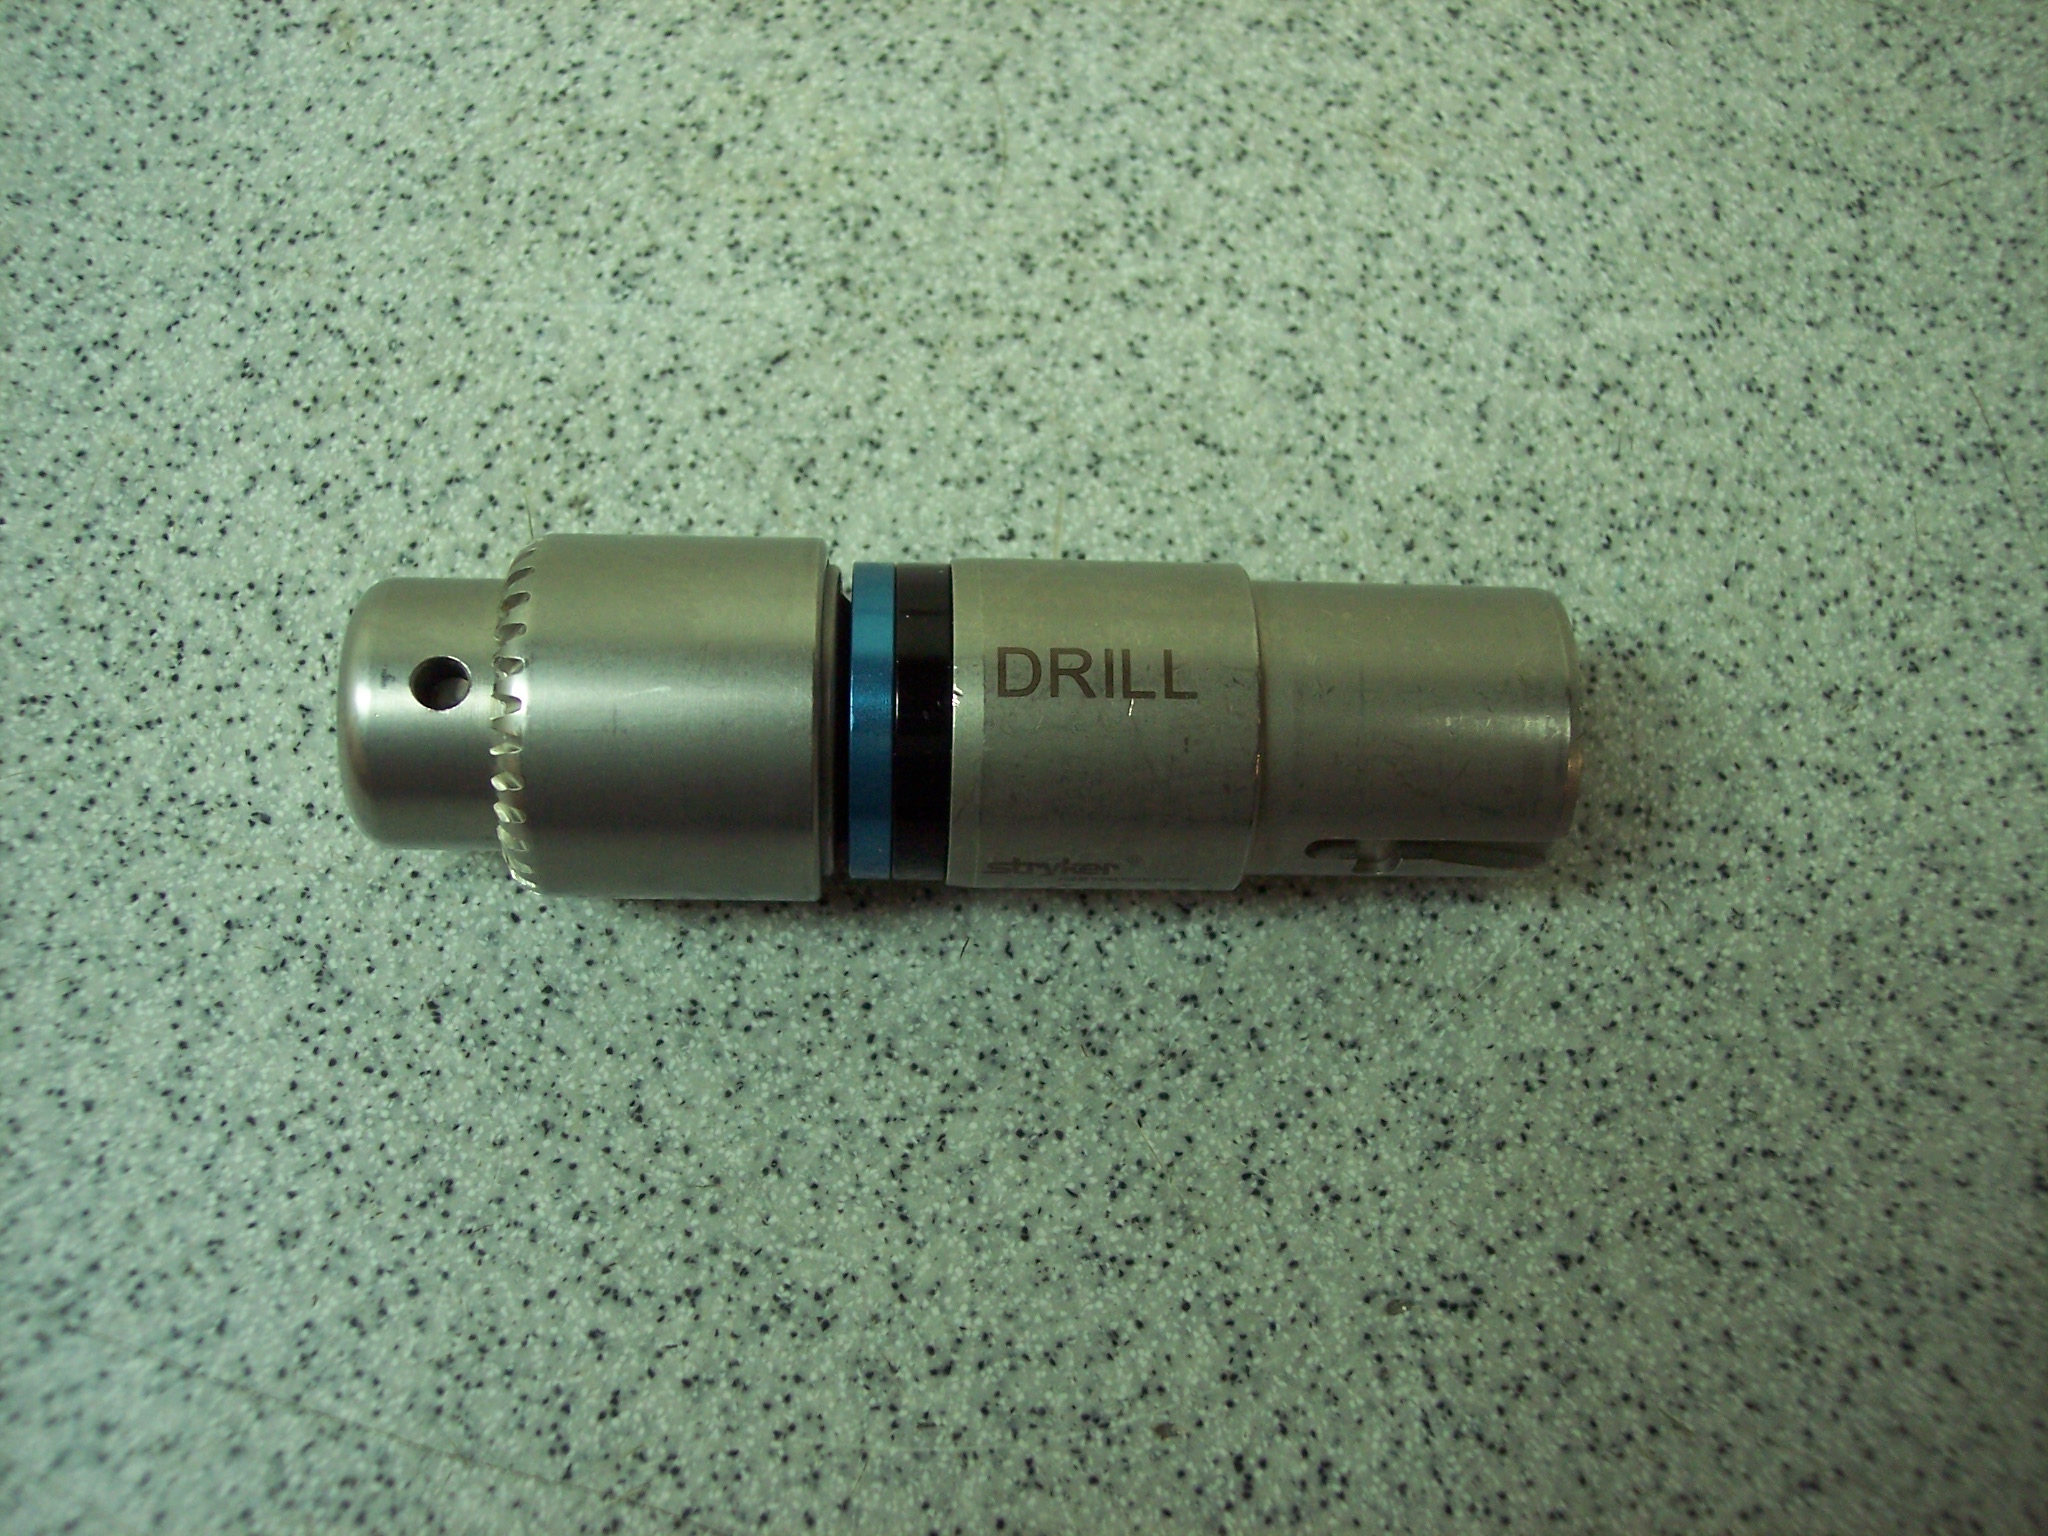 Stryker 4103-131 1/4" Jacobs Drill Attac